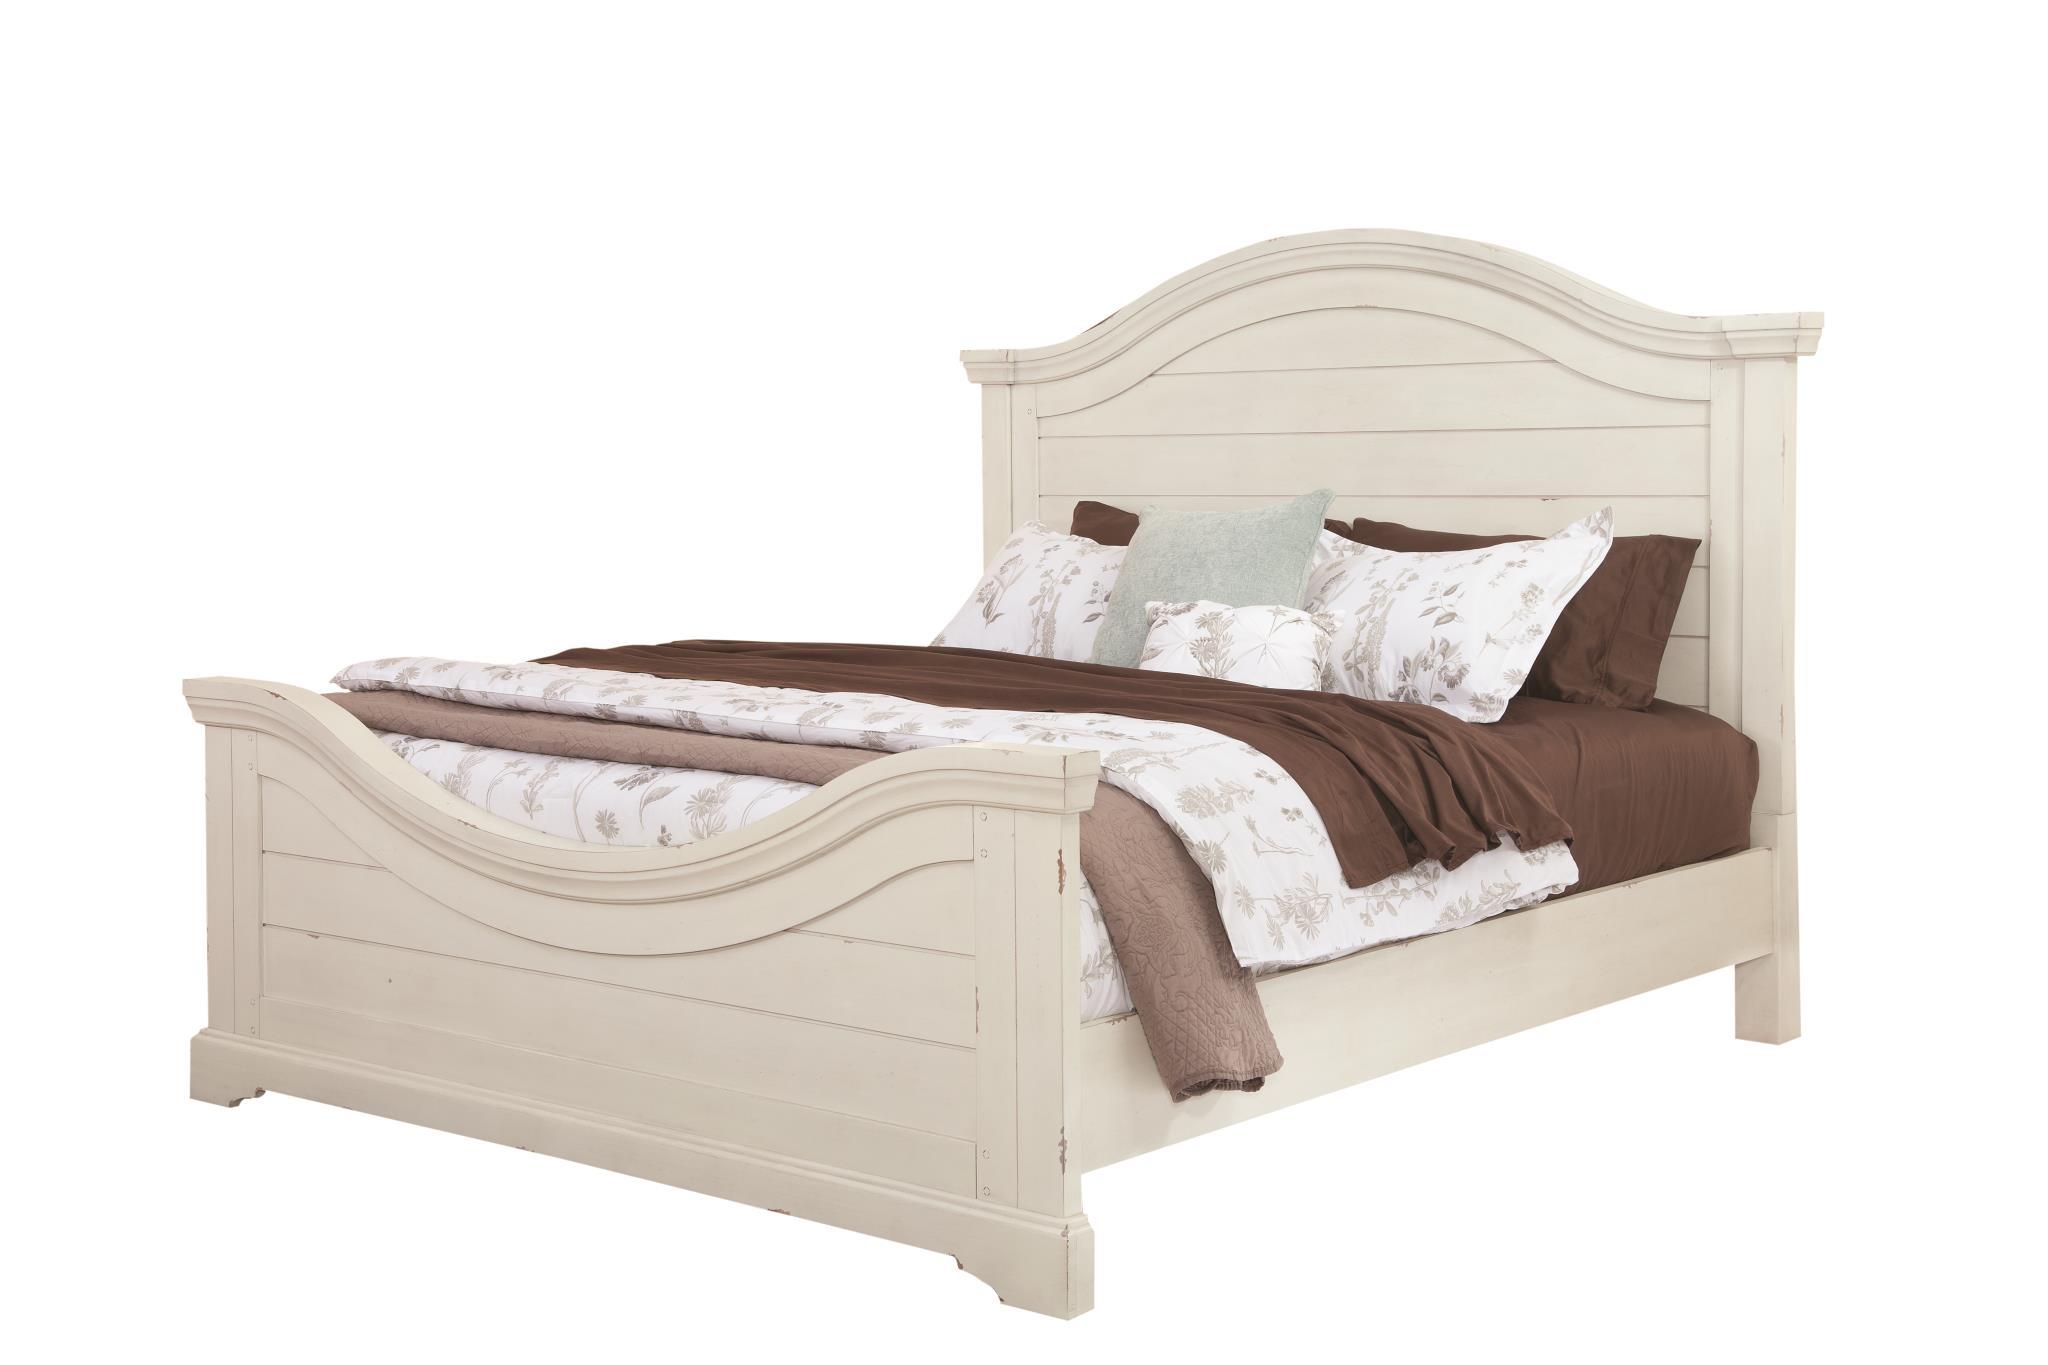 Classic, Traditional Panel Bed 7810 STONEBROOK 7810-66PAN in Antique White 